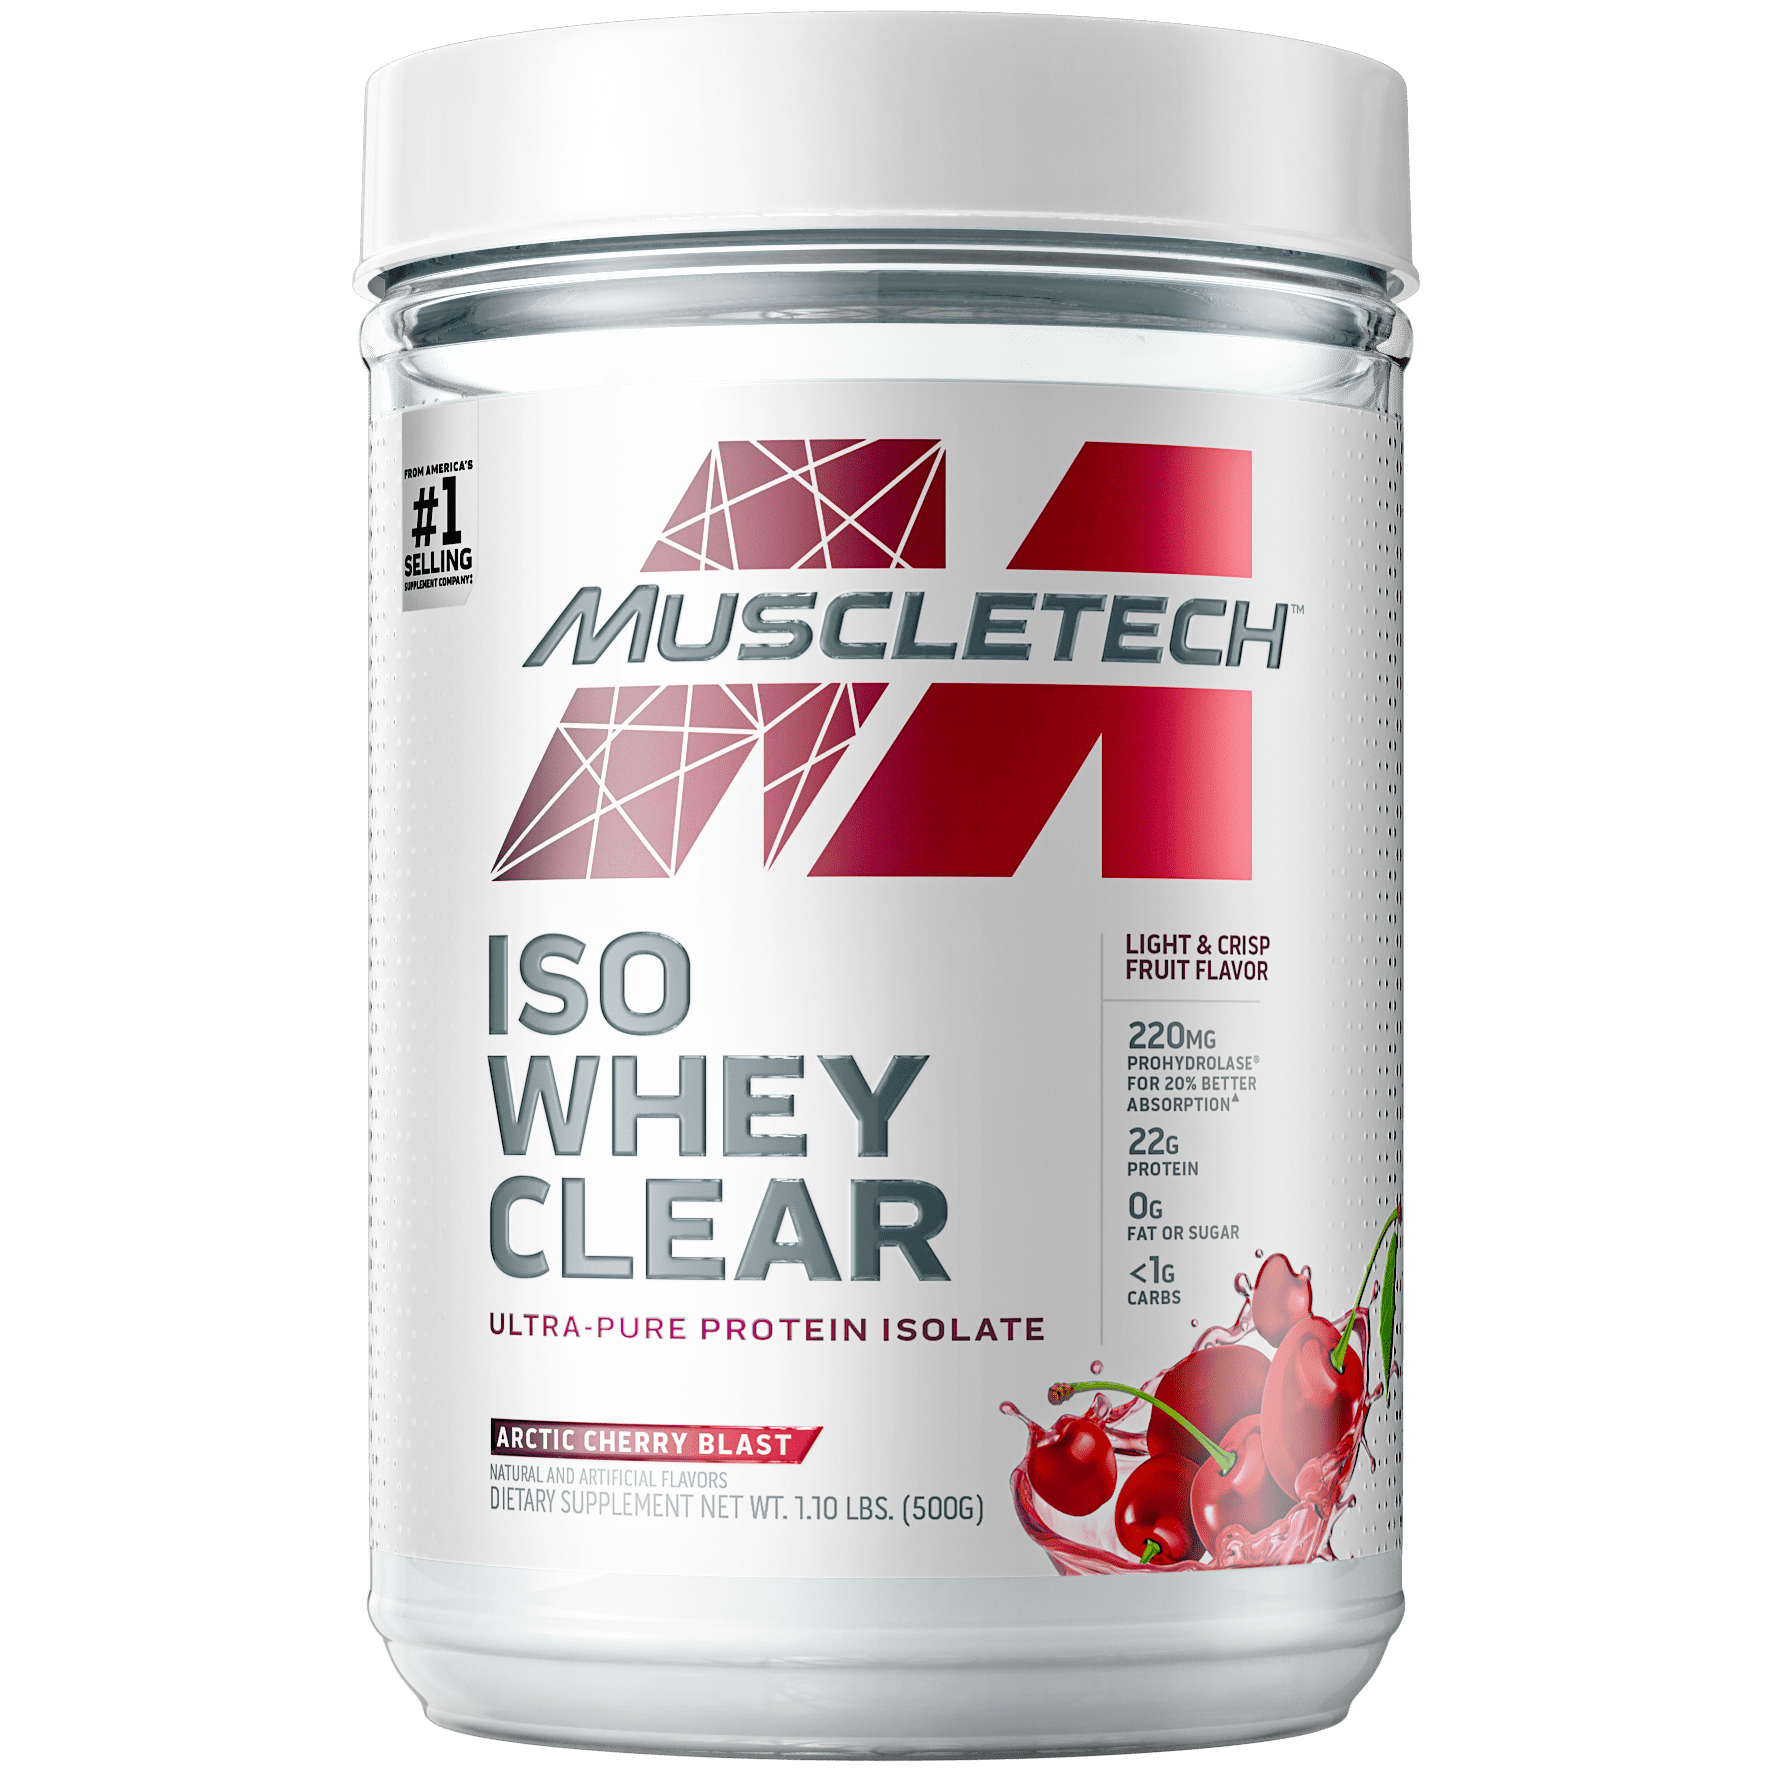 MuscleTech Iso Whey Protein Powder, Arctic Cherry Blast, 19 Servings